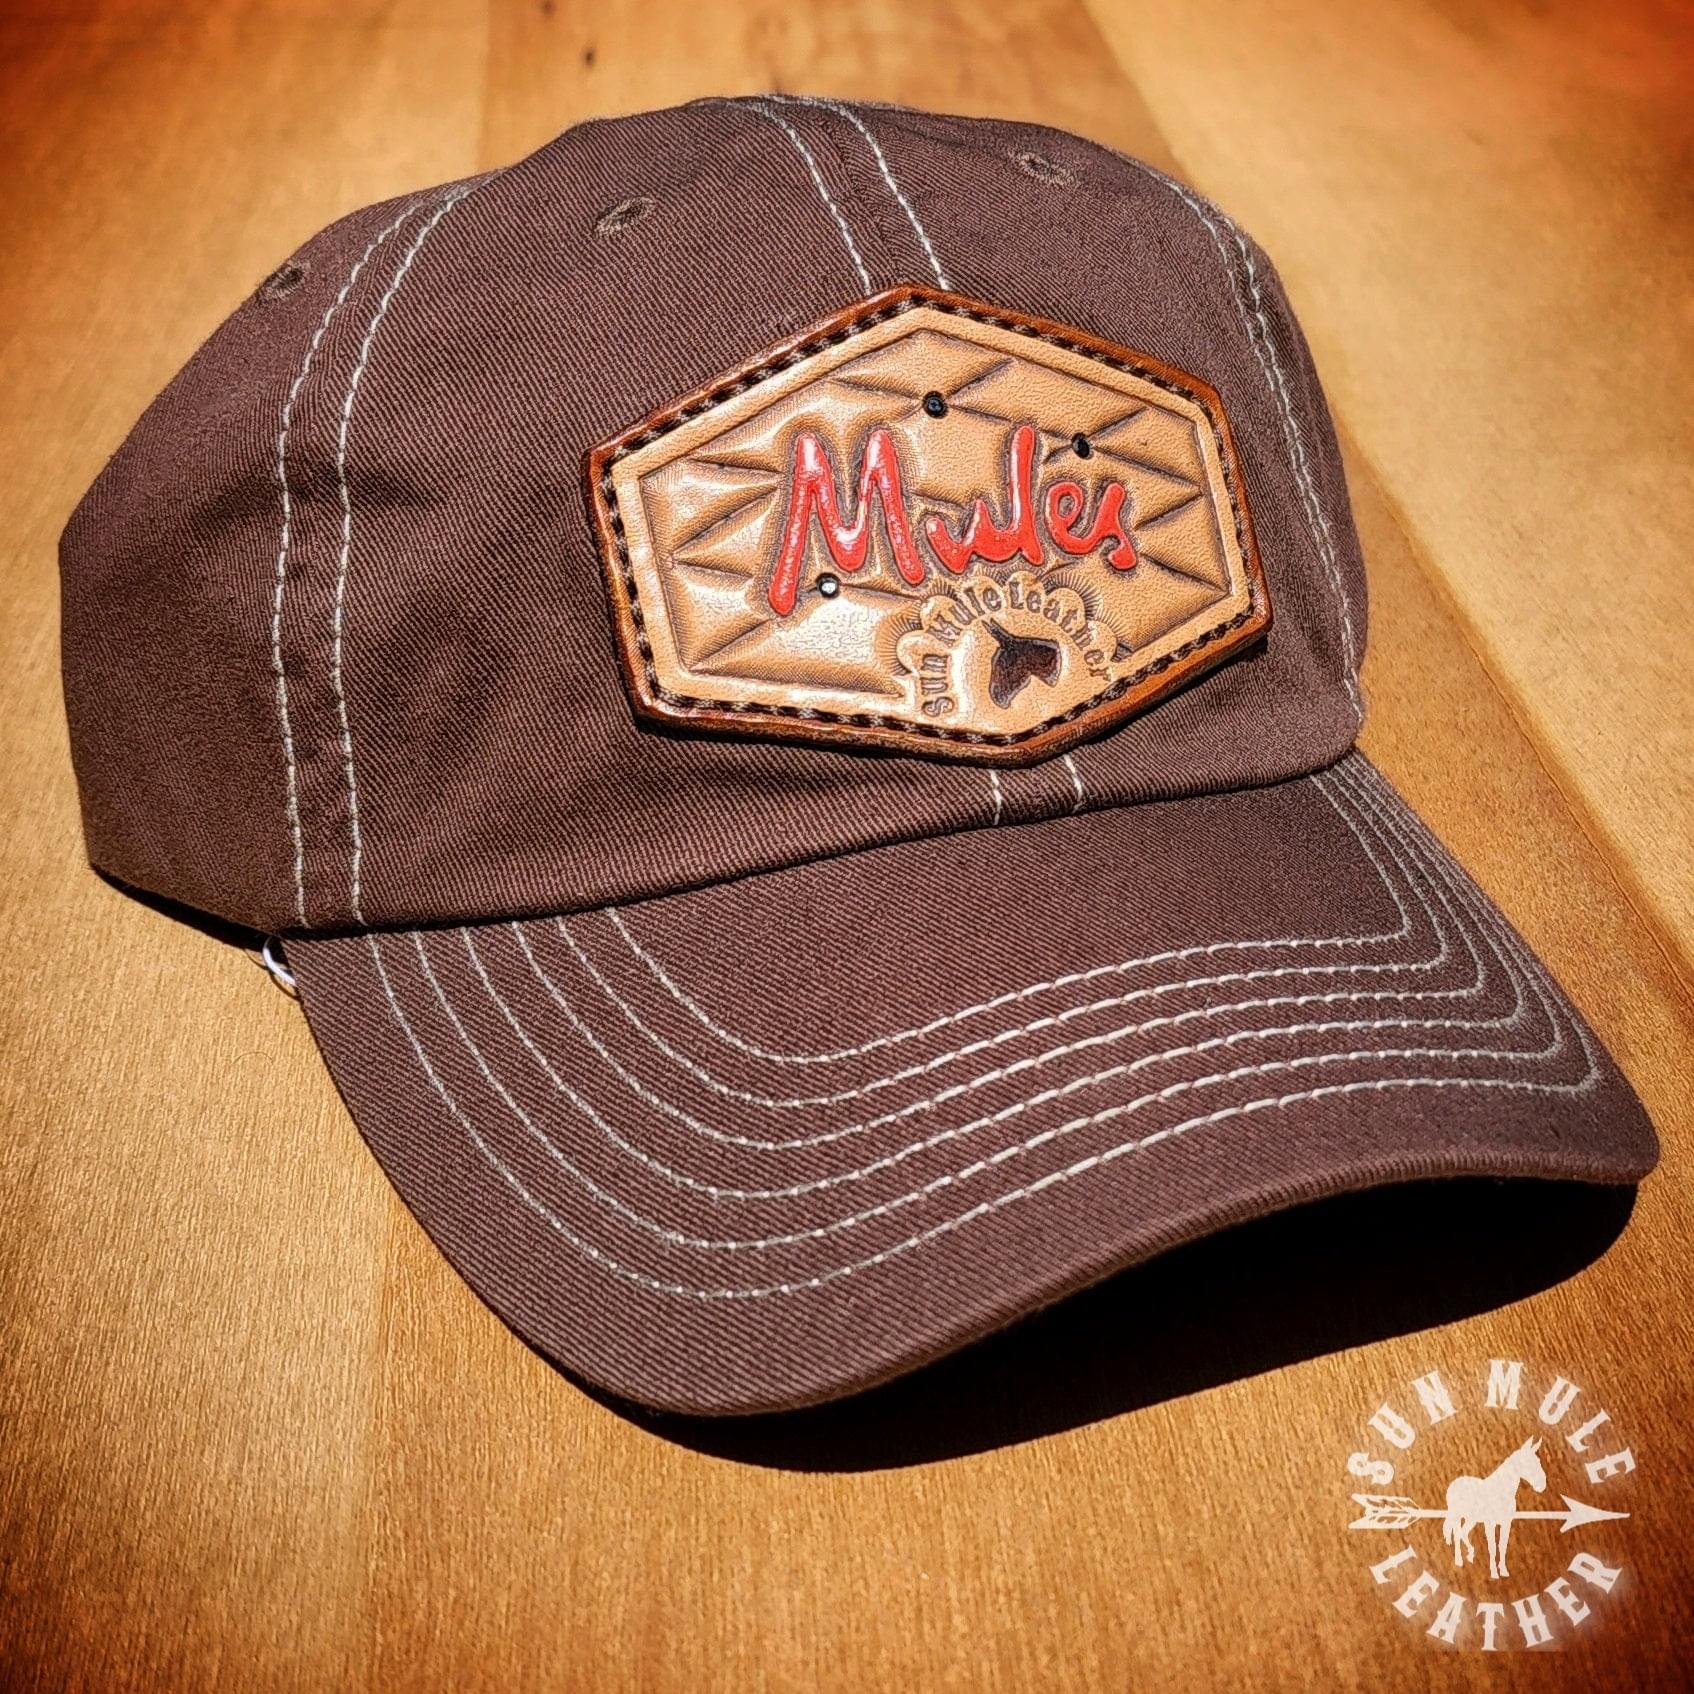 Unstructured mule hat, hat with hand tooled leather patch, featuring the word "Mules".